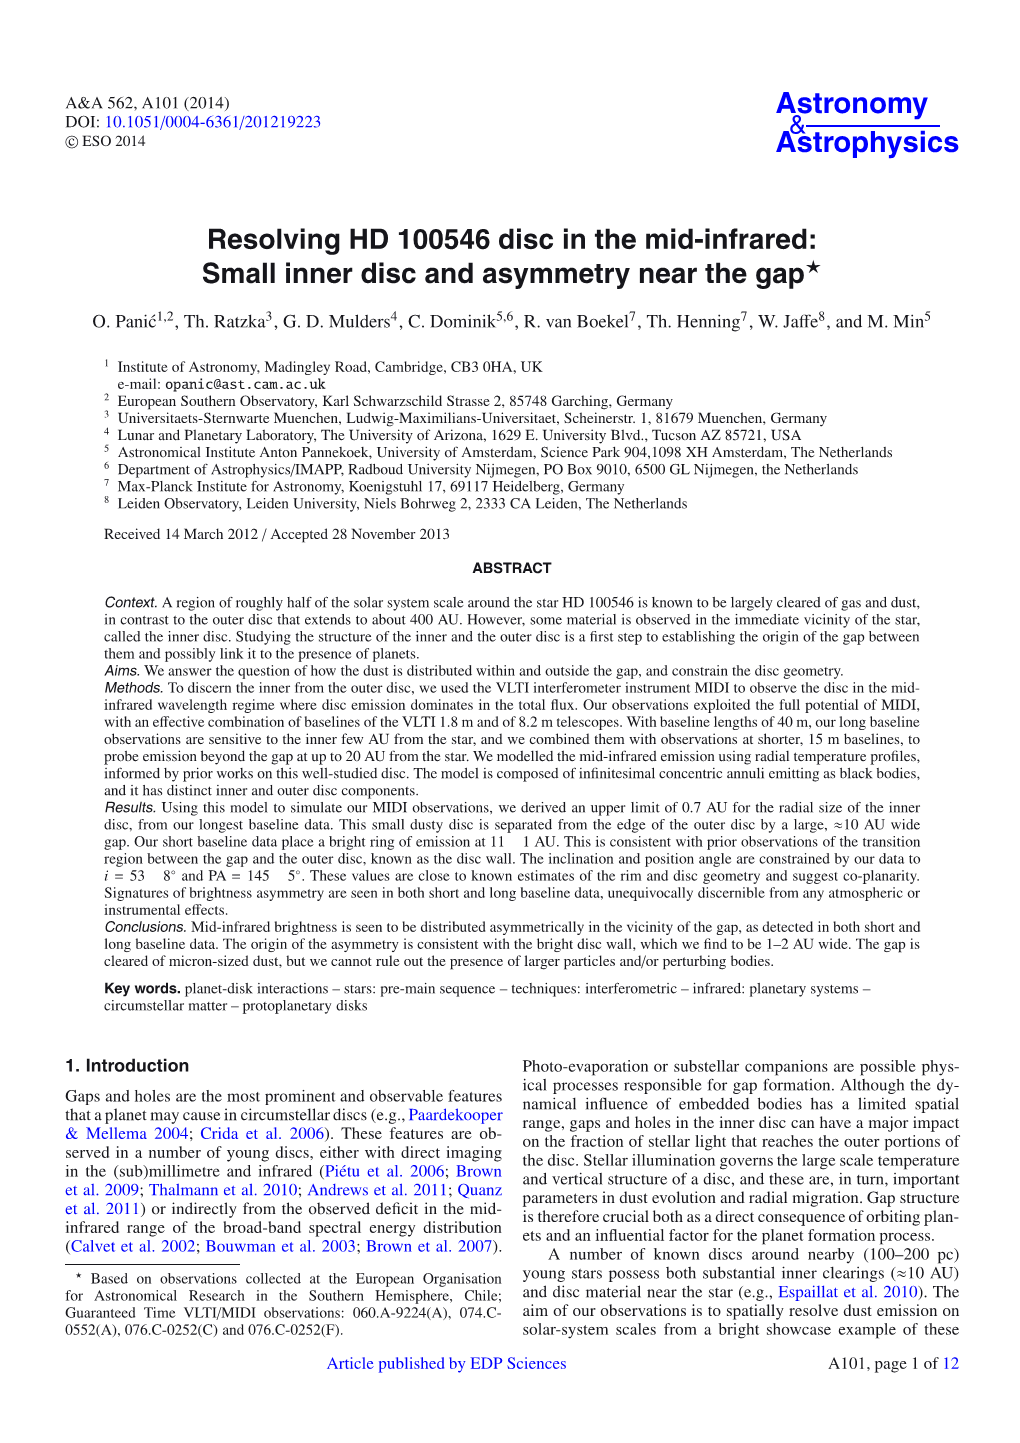 Resolving HD 100546 Disc in the Mid-Infrared: Small Inner Disc and Asymmetry Near the Gap